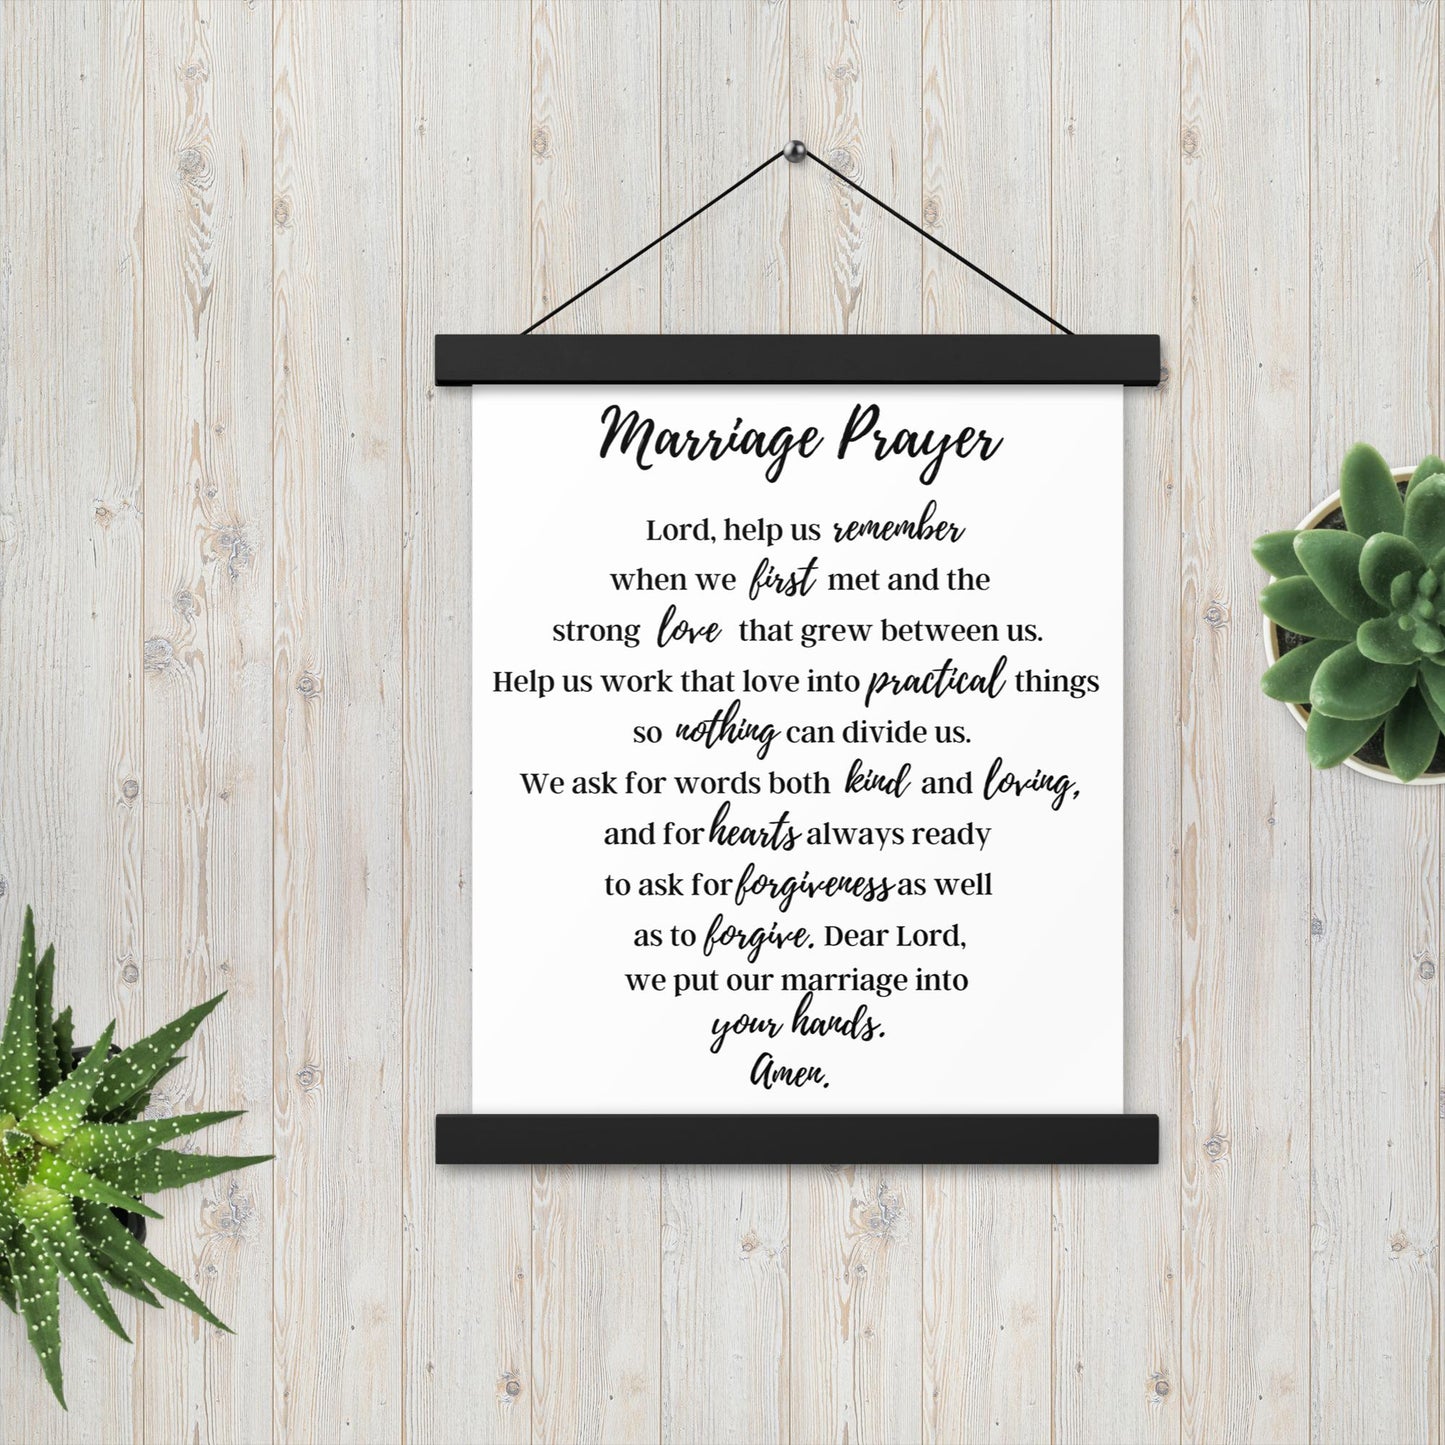 Marriage Prayer poster with wood hangers